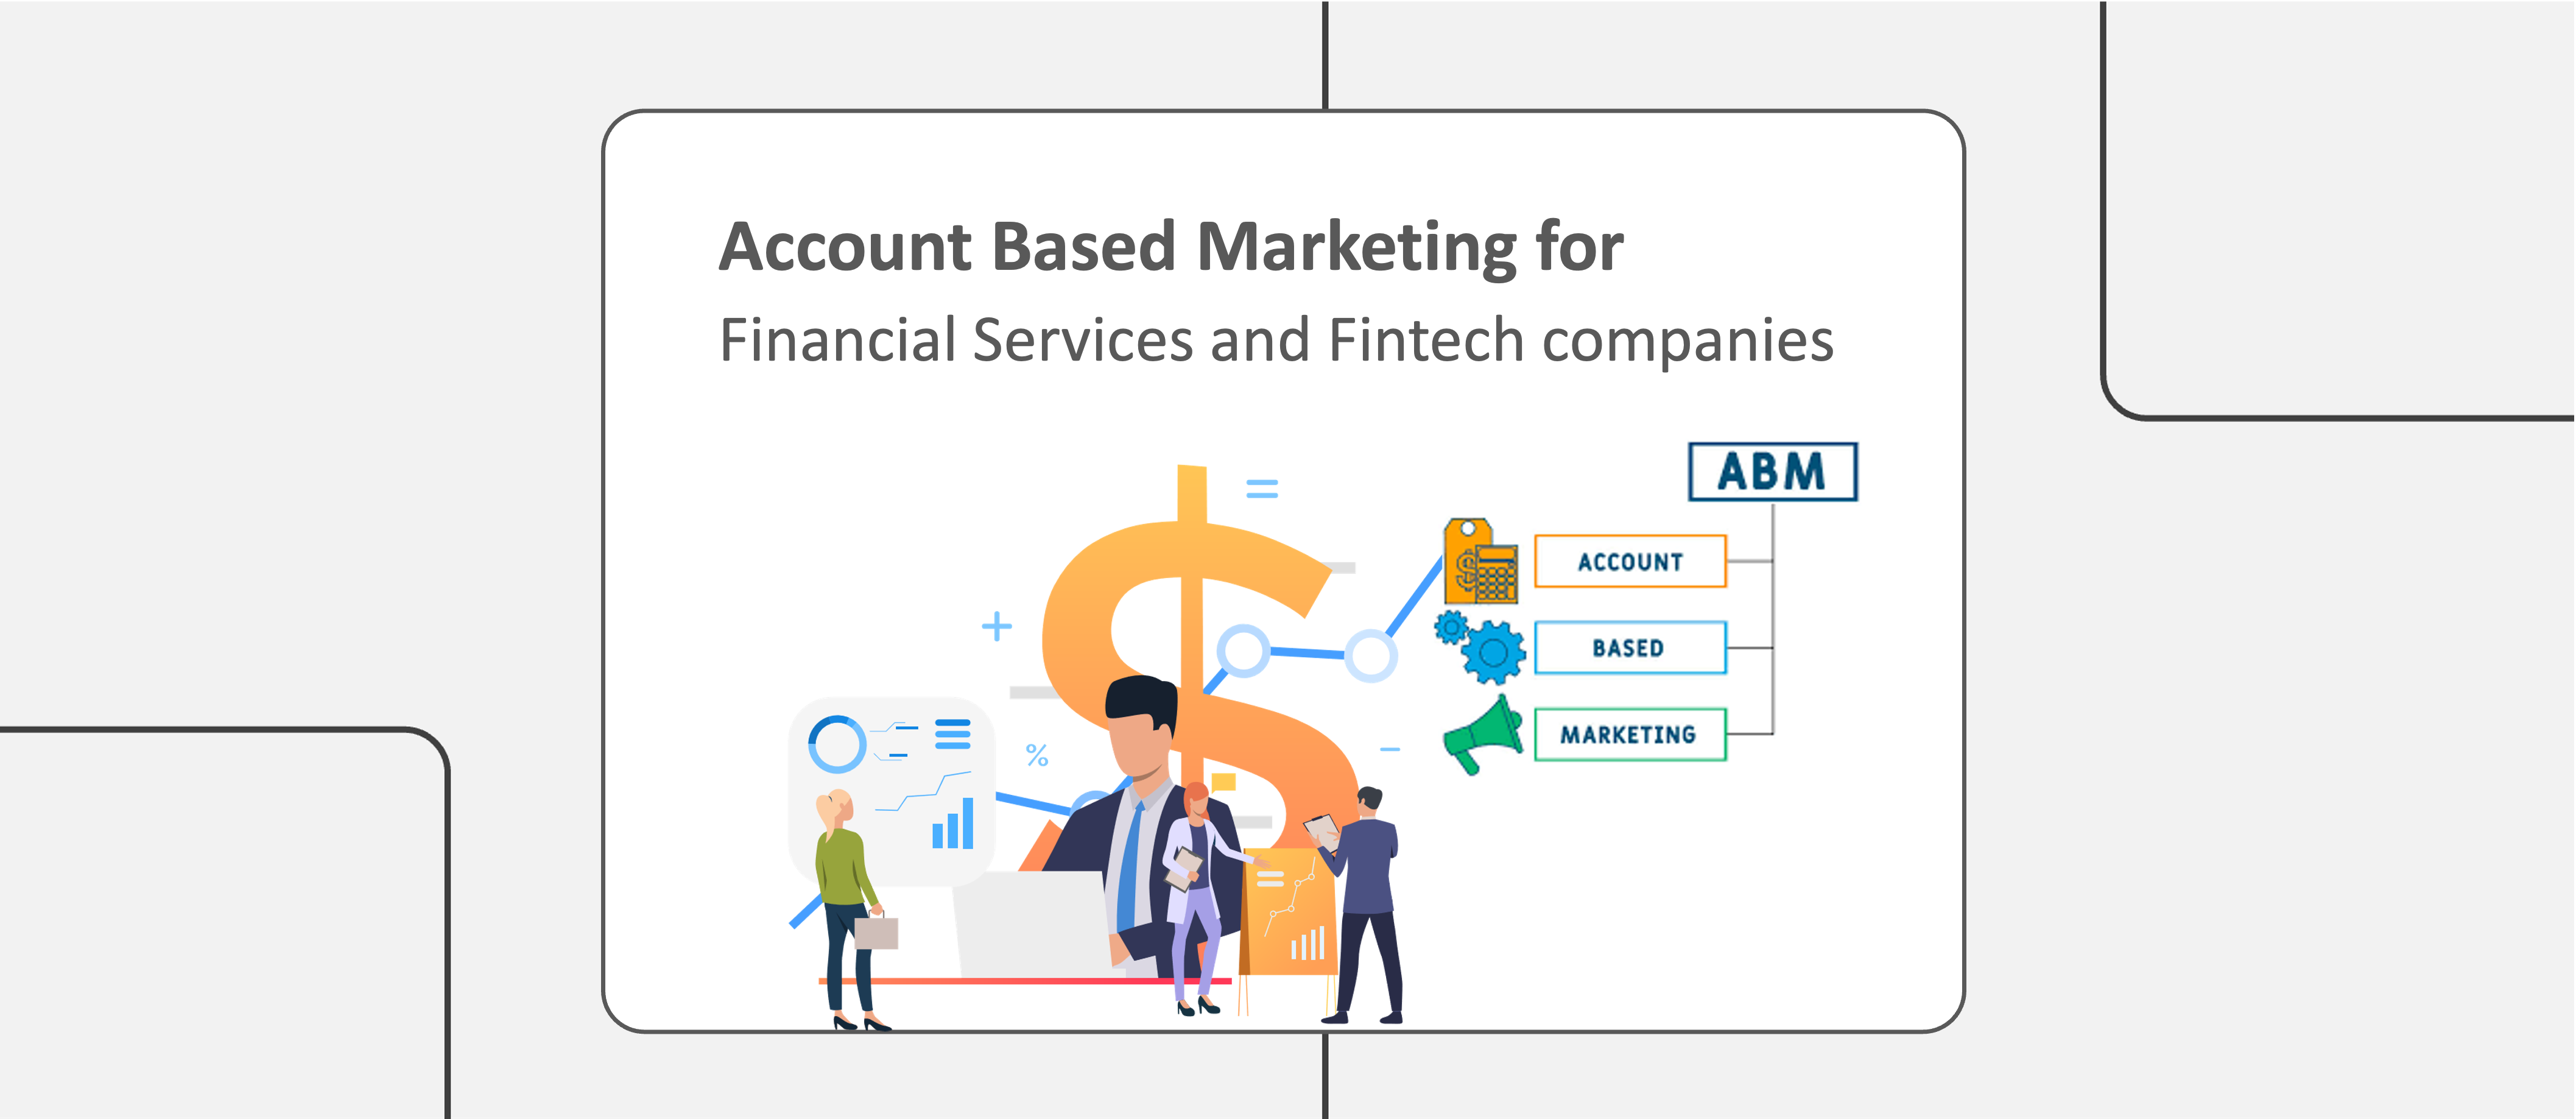 How Financial Services and Fintech companies can Leverage Account Based Marketing Strategies?